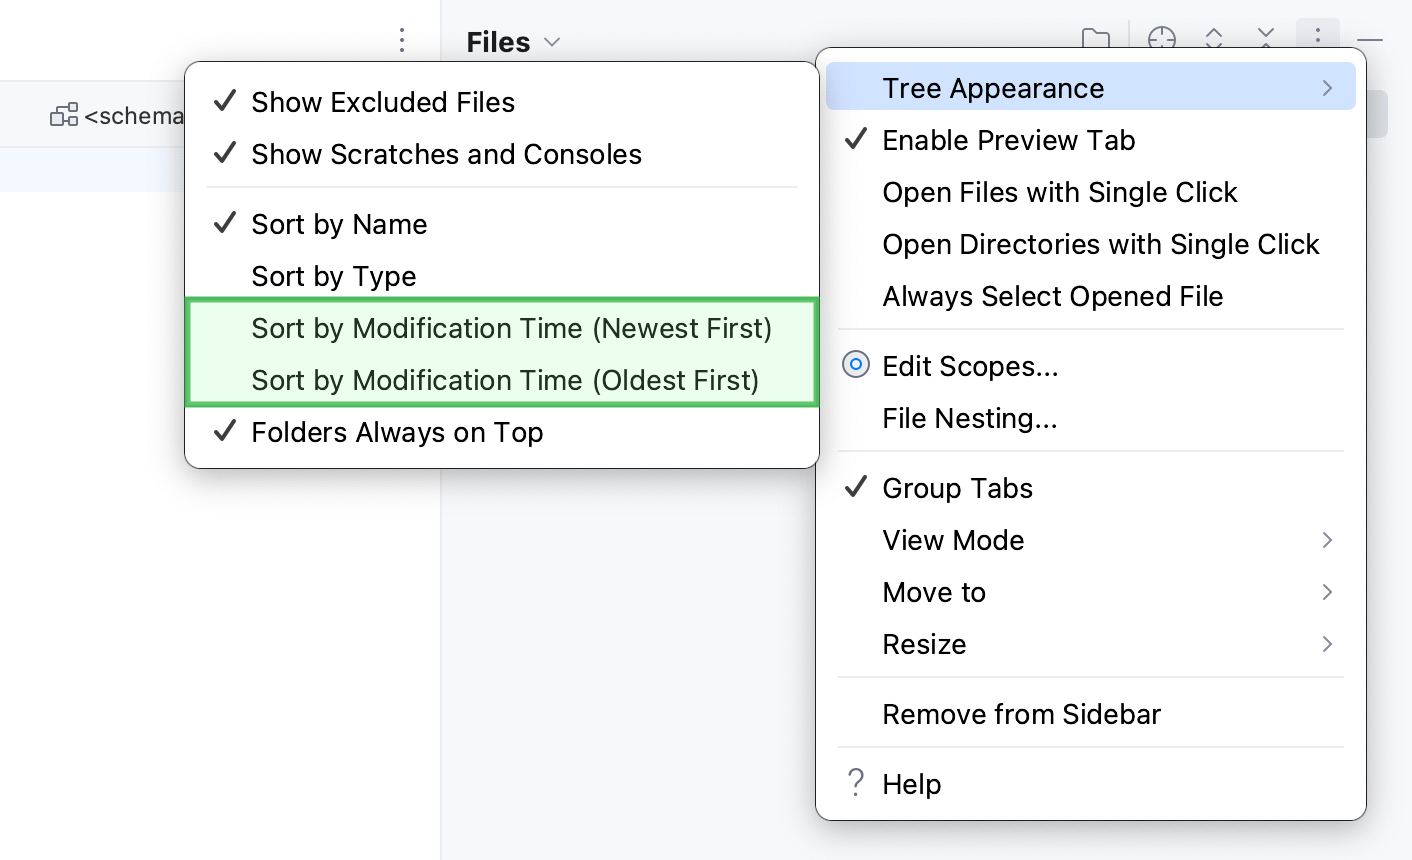 the Hide Scratches and Directories option